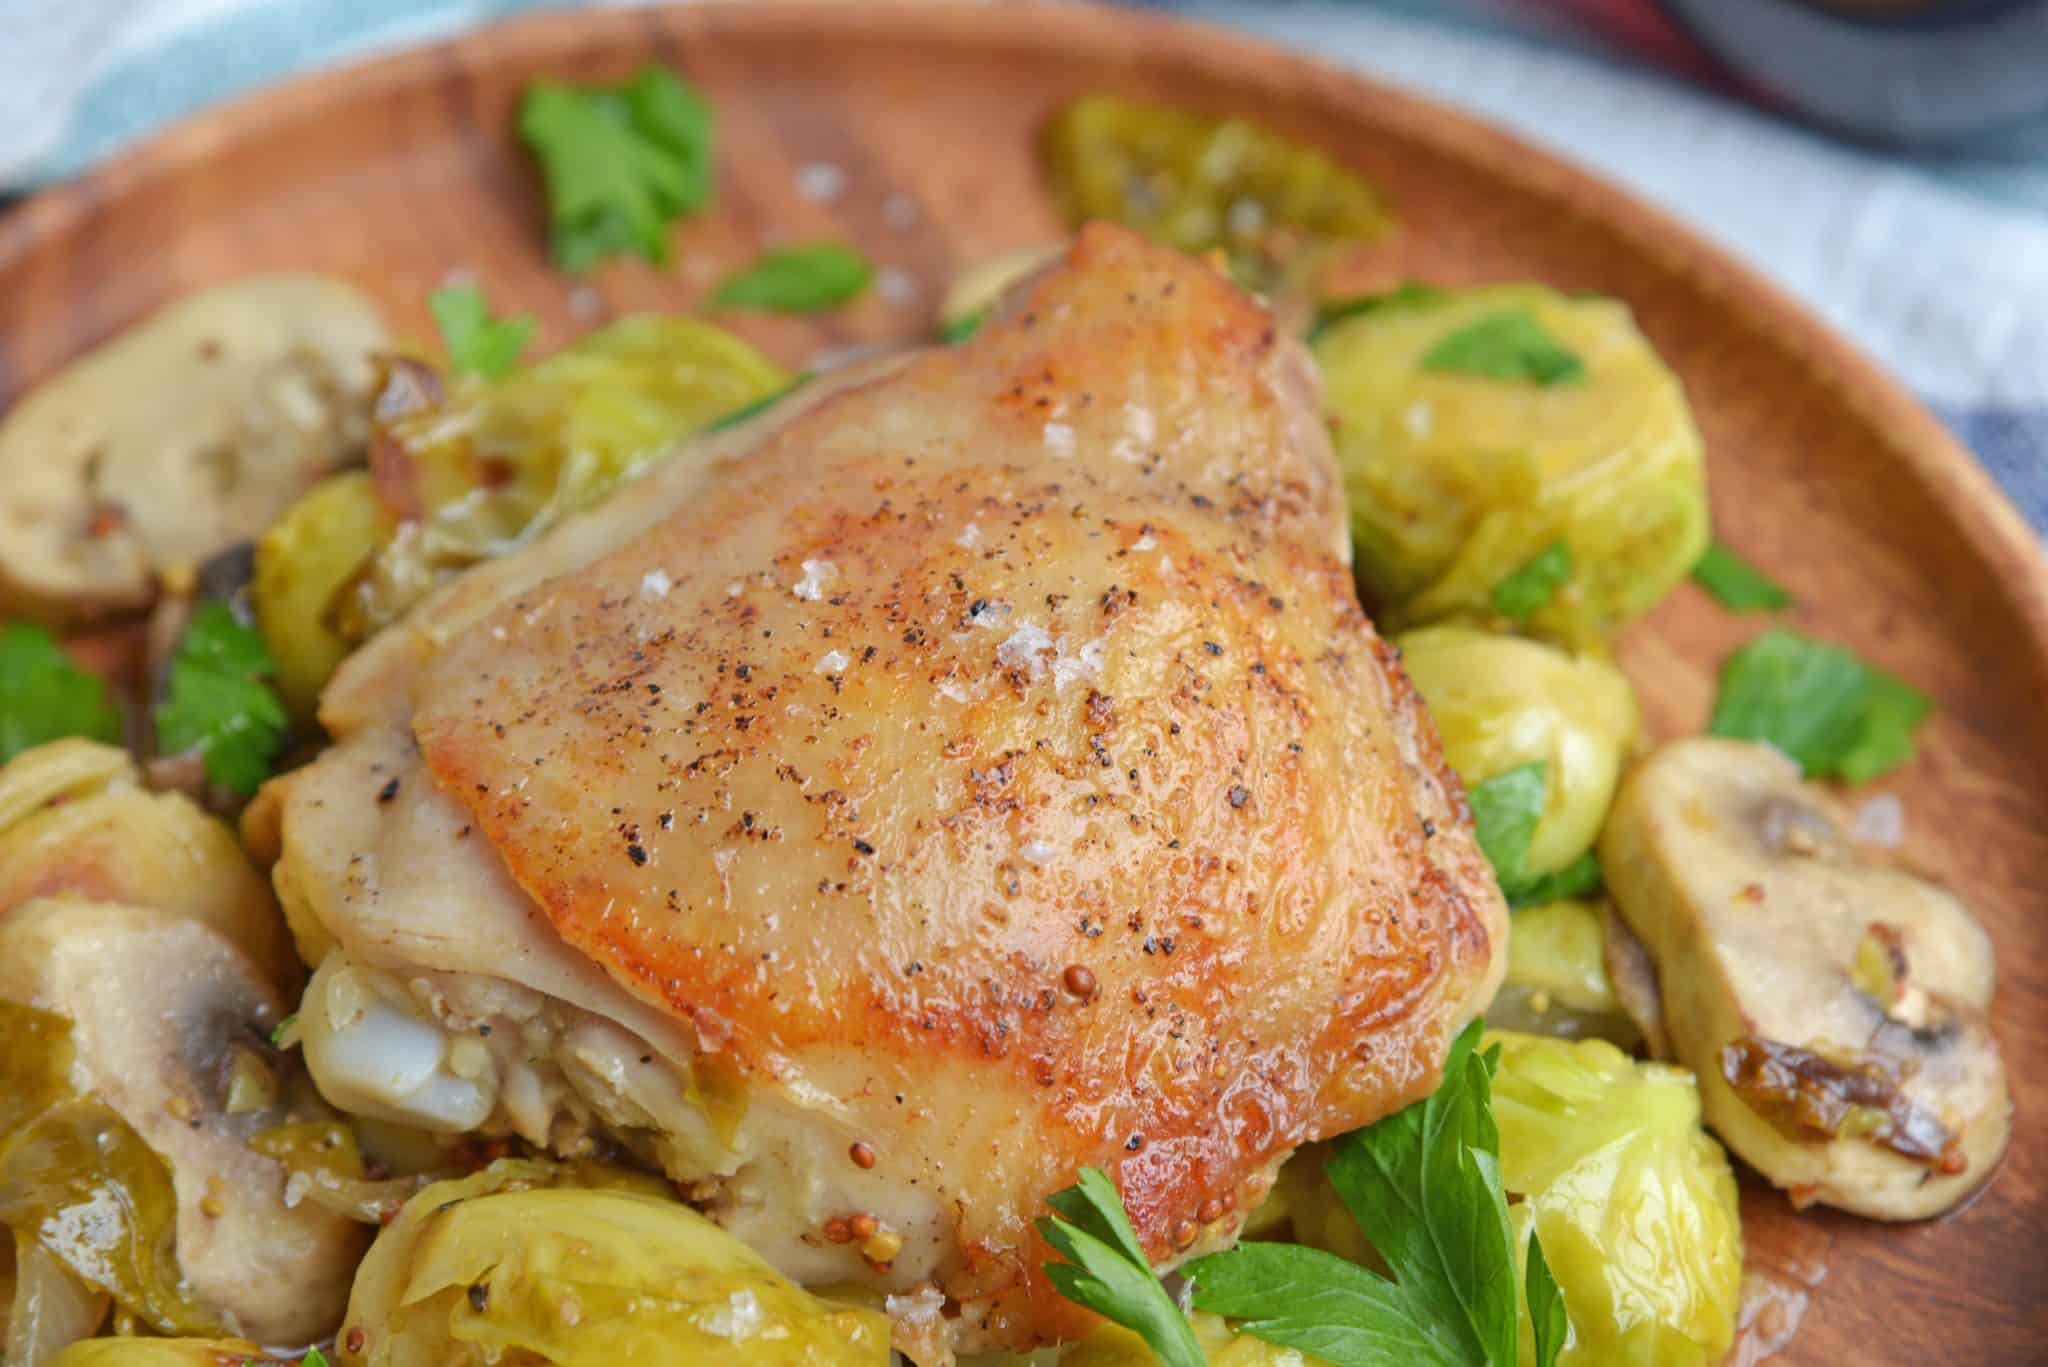 Chicken Dijon is an easy dinner recipe using chicken thighs, mushrooms, brussels sprouts, sweet onions, apple juice and of course, Dijon mustard! #chickendijon #mustardchicken #easychickenrecipe www.savoryexperiments.com 